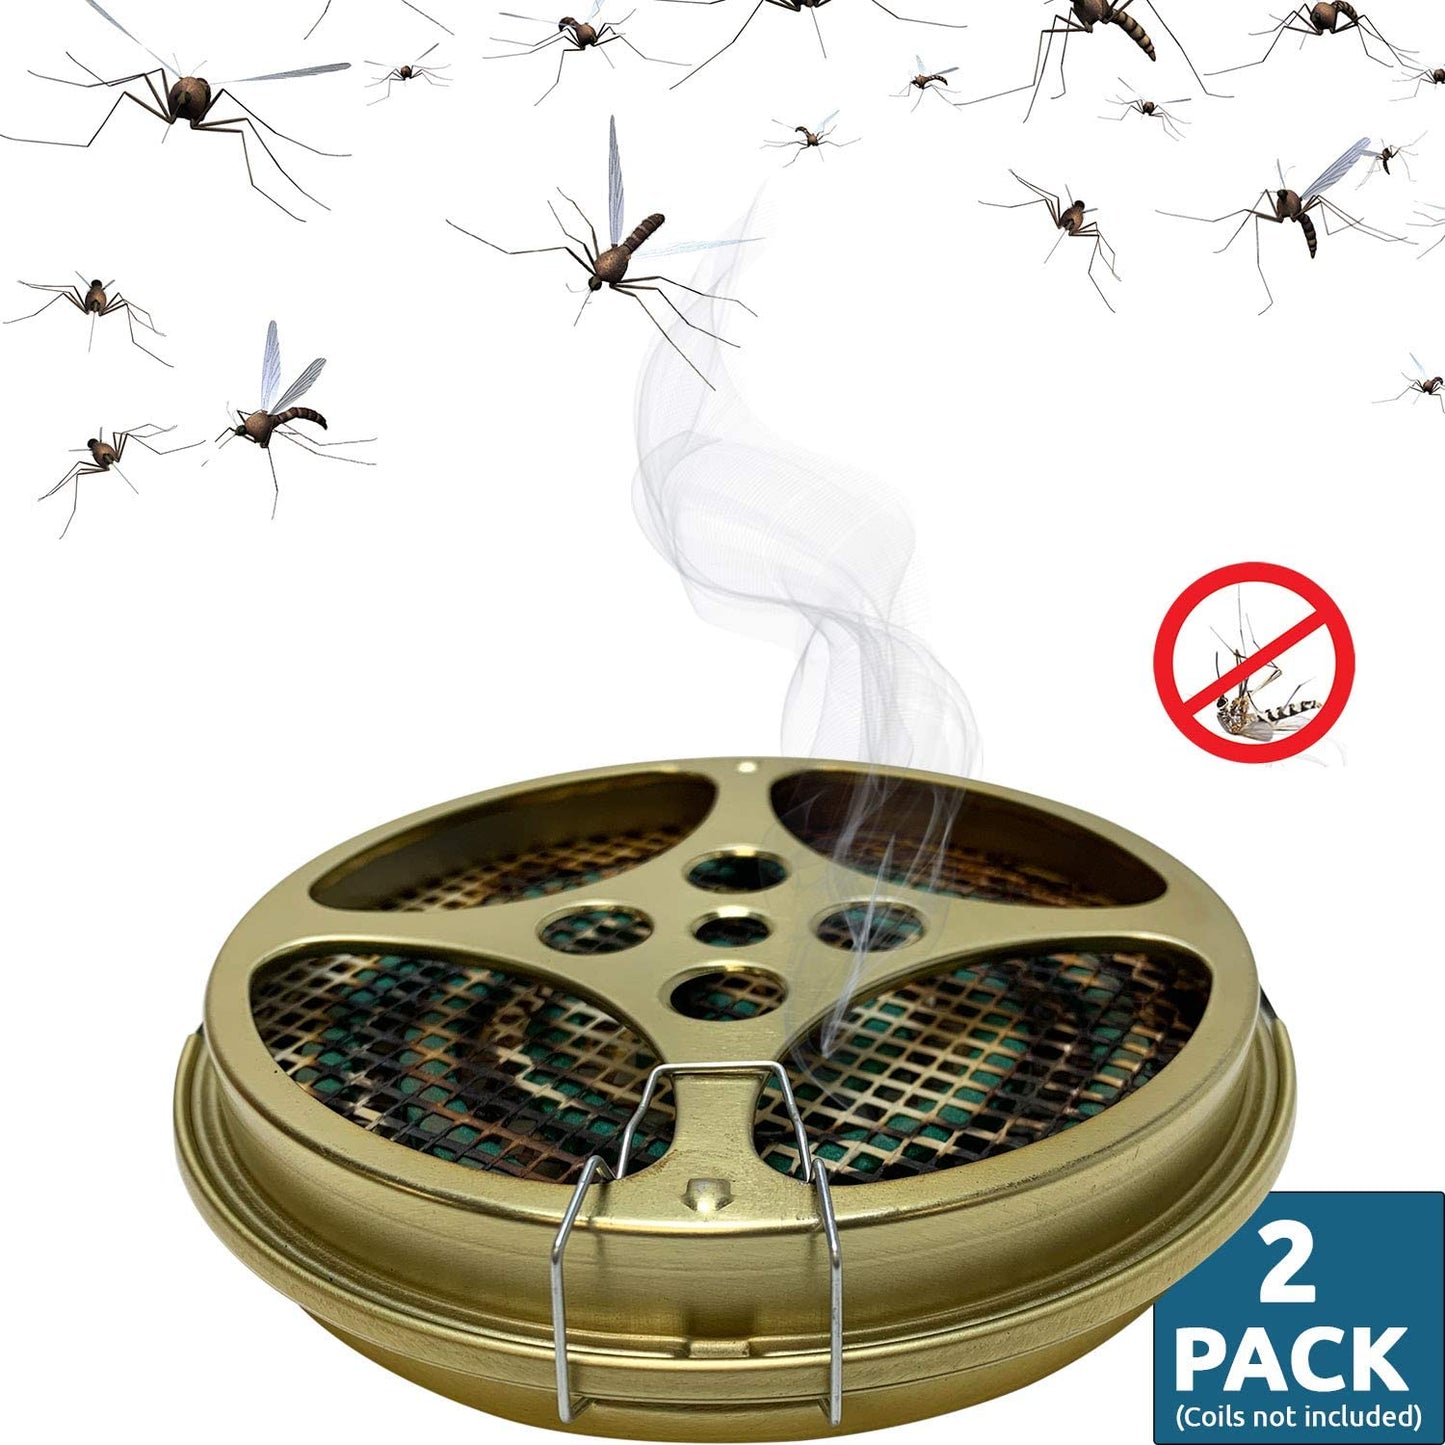 Portable Mosquito Coil Holder - Mosquito Coil & incense burner for Outdoor use, Pool side, Patio, Deck, Camping, Hiking, etc. (Includes Set of 2 Holders)